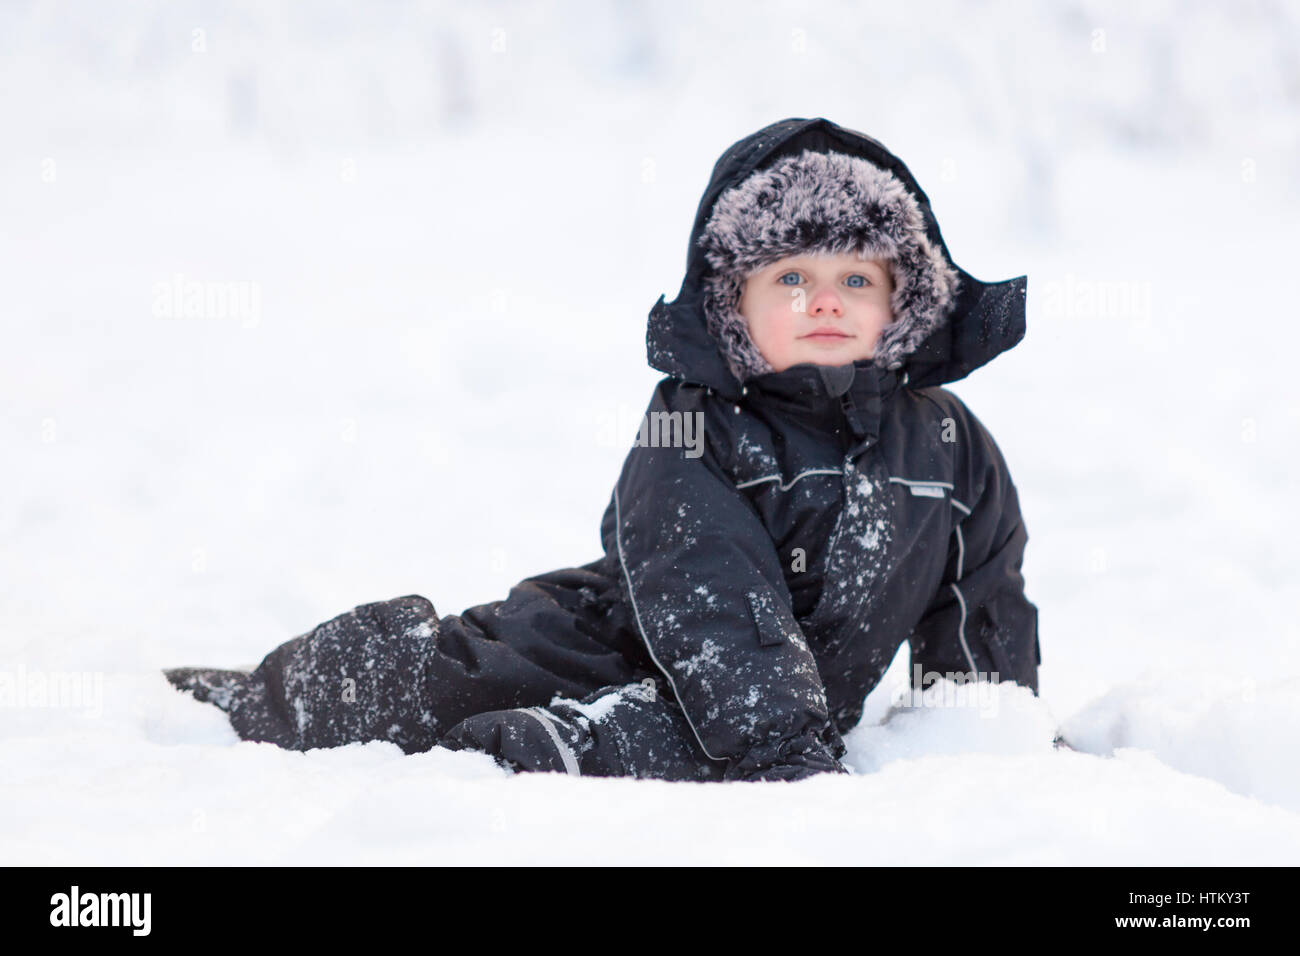 https://c8.alamy.com/comp/HTKY3T/young-boy-in-warm-winter-thermal-suit-clothing-outdoor-portrait-in-HTKY3T.jpg